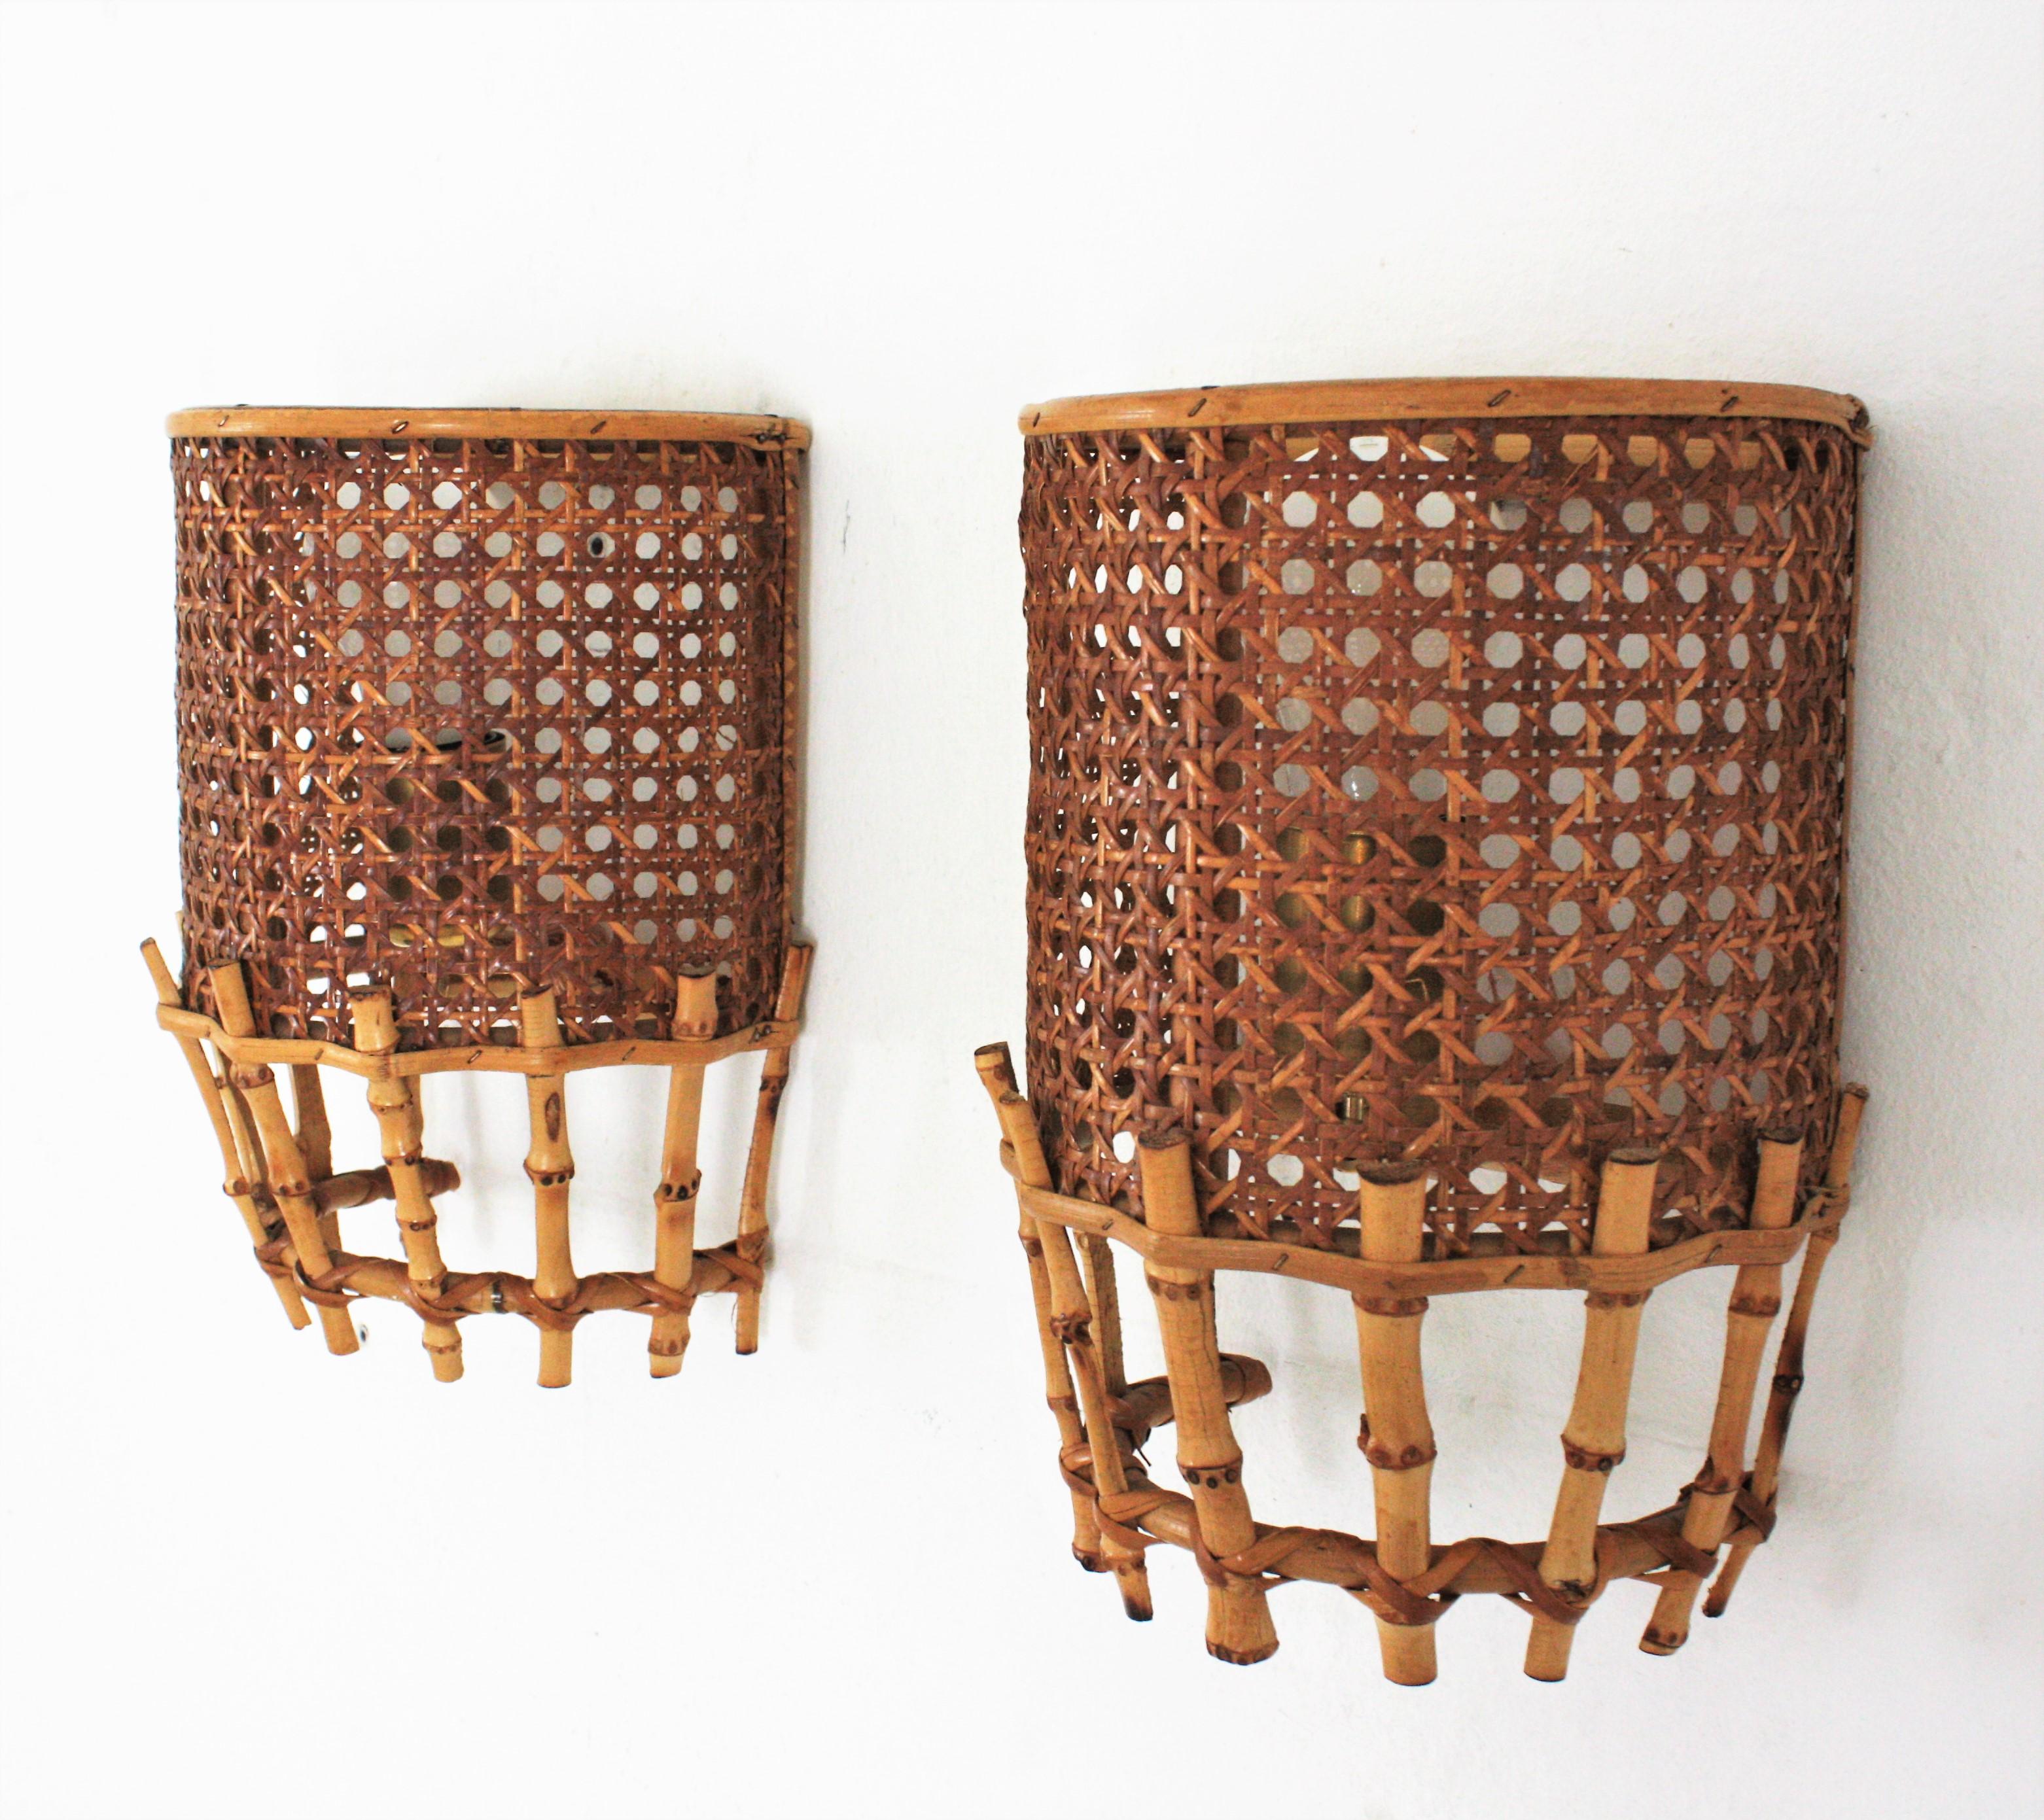 Pair of half cylinder wall lights with wicker and rattan woven shades and bamboo accents, France, 1960s.
These light fixtures are made with wicker basket weave panel on a rattan semi cylindrical structure accented by bamboo canes at the bottom